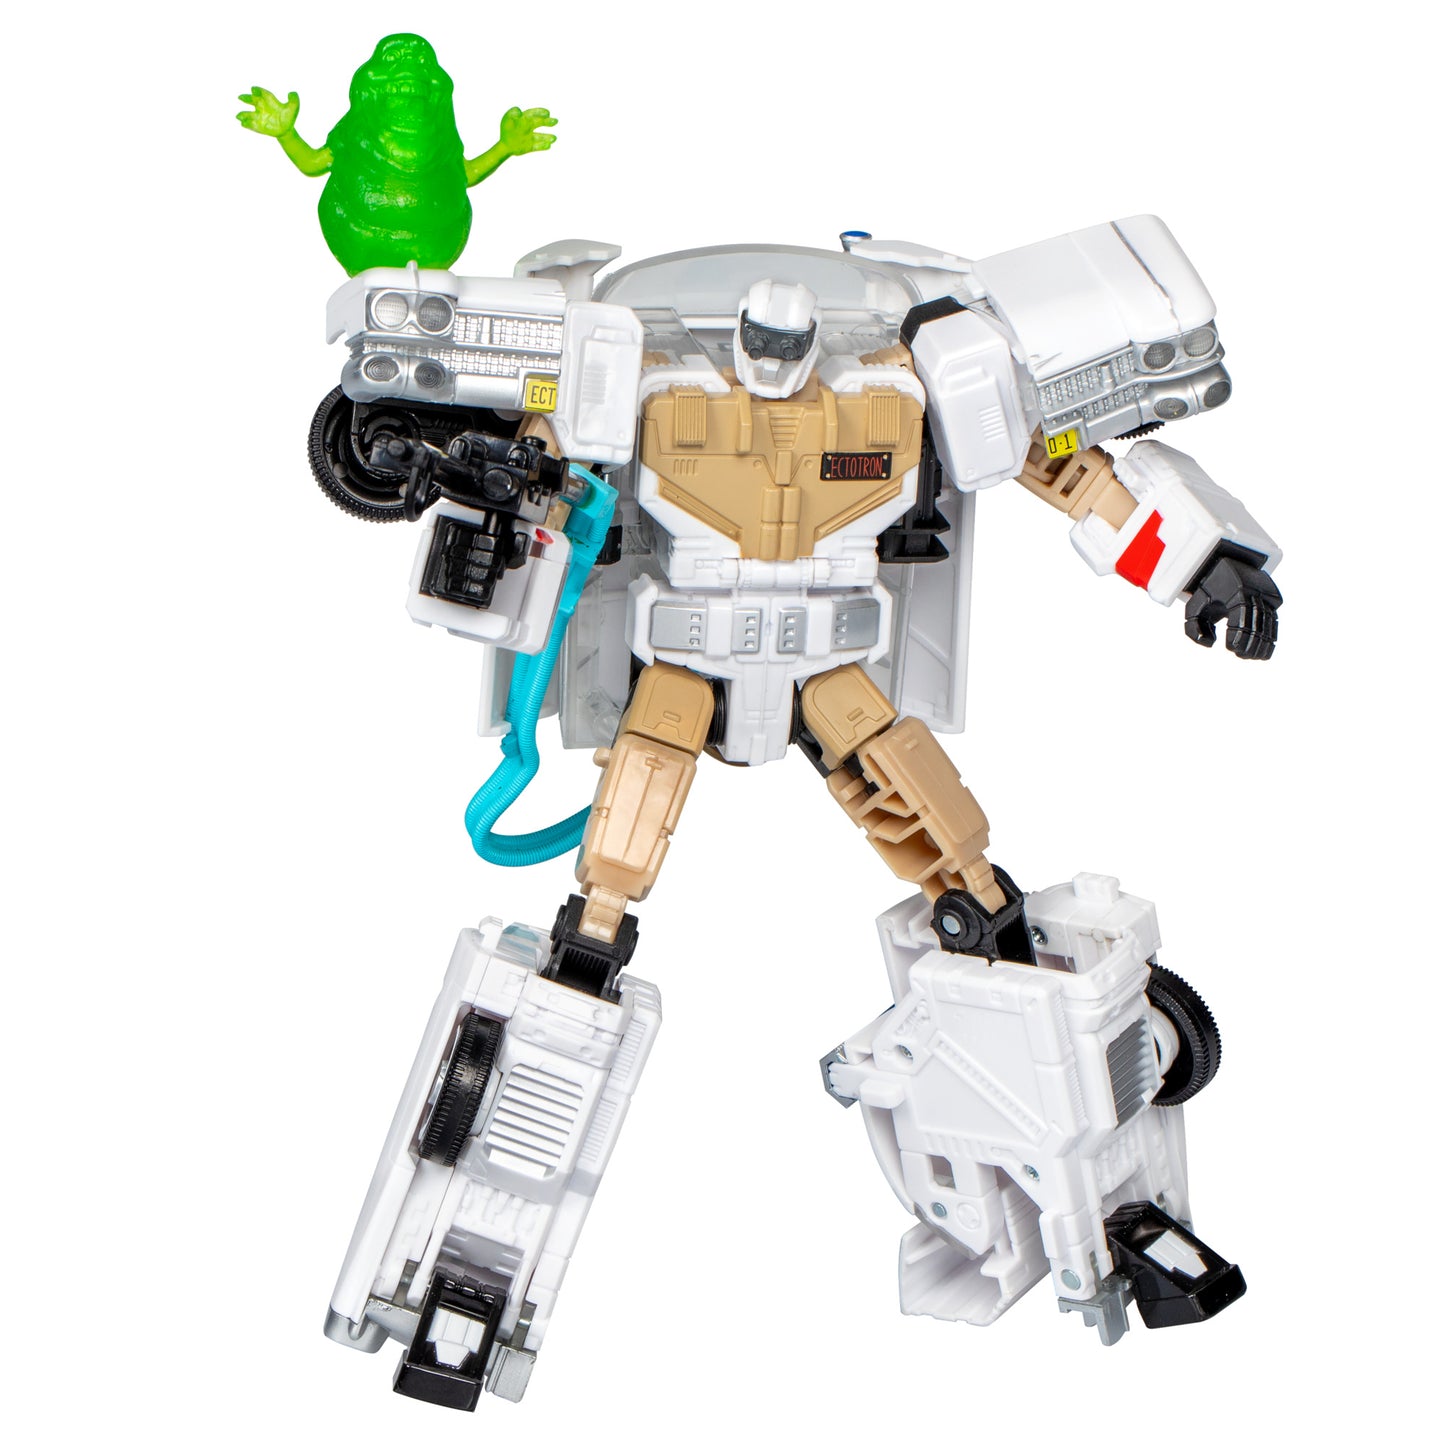 Transformers Collaborative Ghostbusters x Transformers Toy Ectotron, Transformers Action Figure, 8+